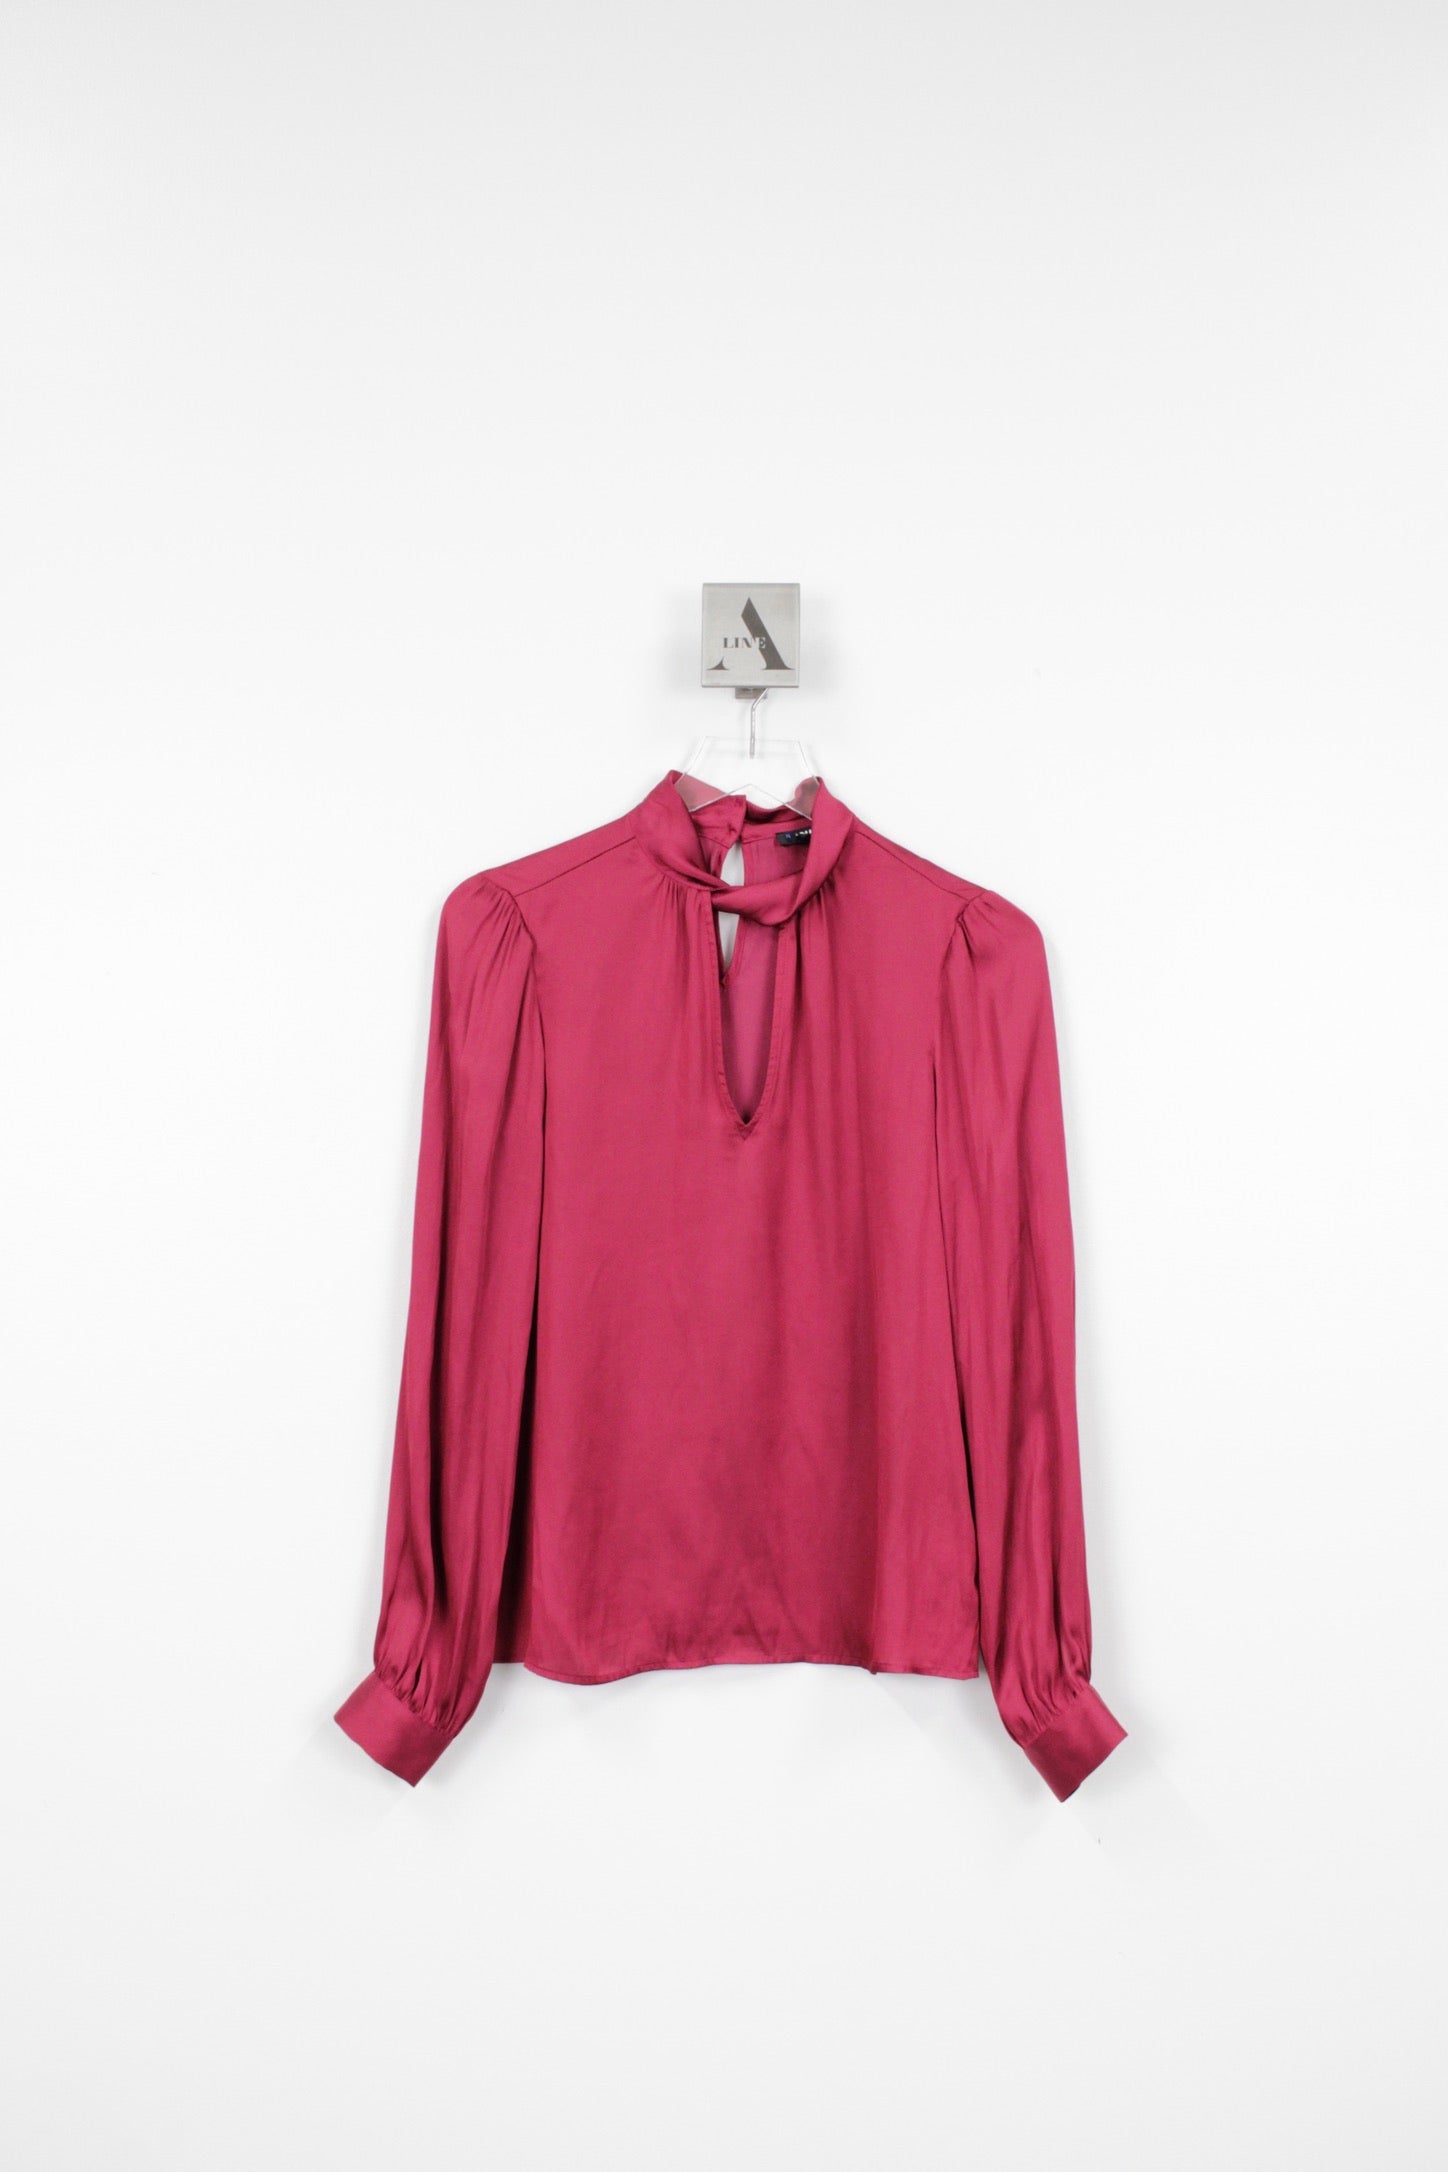 Ceres Top - Mulberry